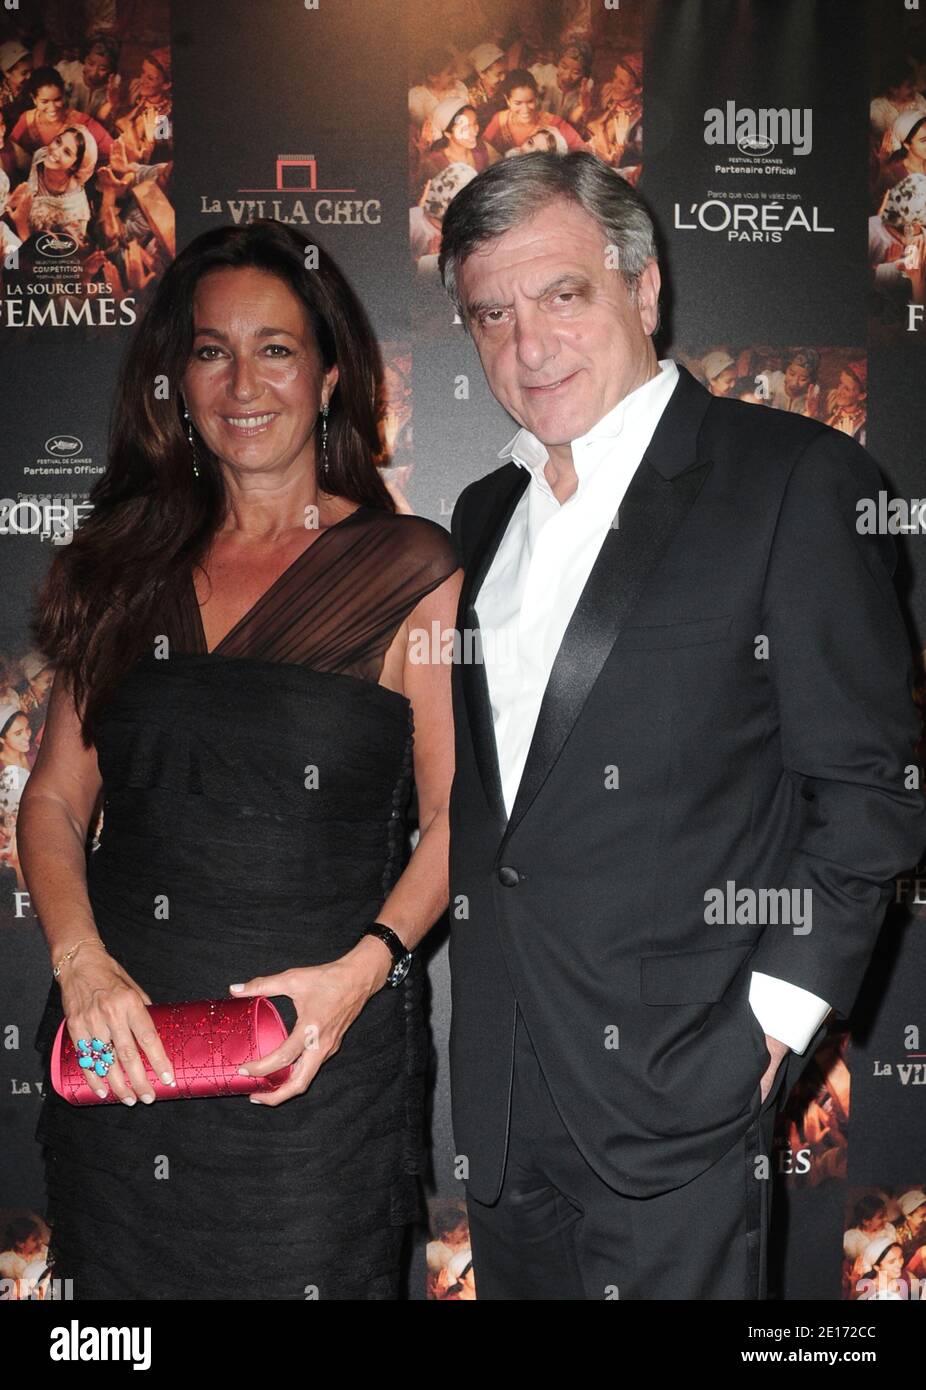 Sidney Toledano, Christian Dior CEO and his wife attending the 'La